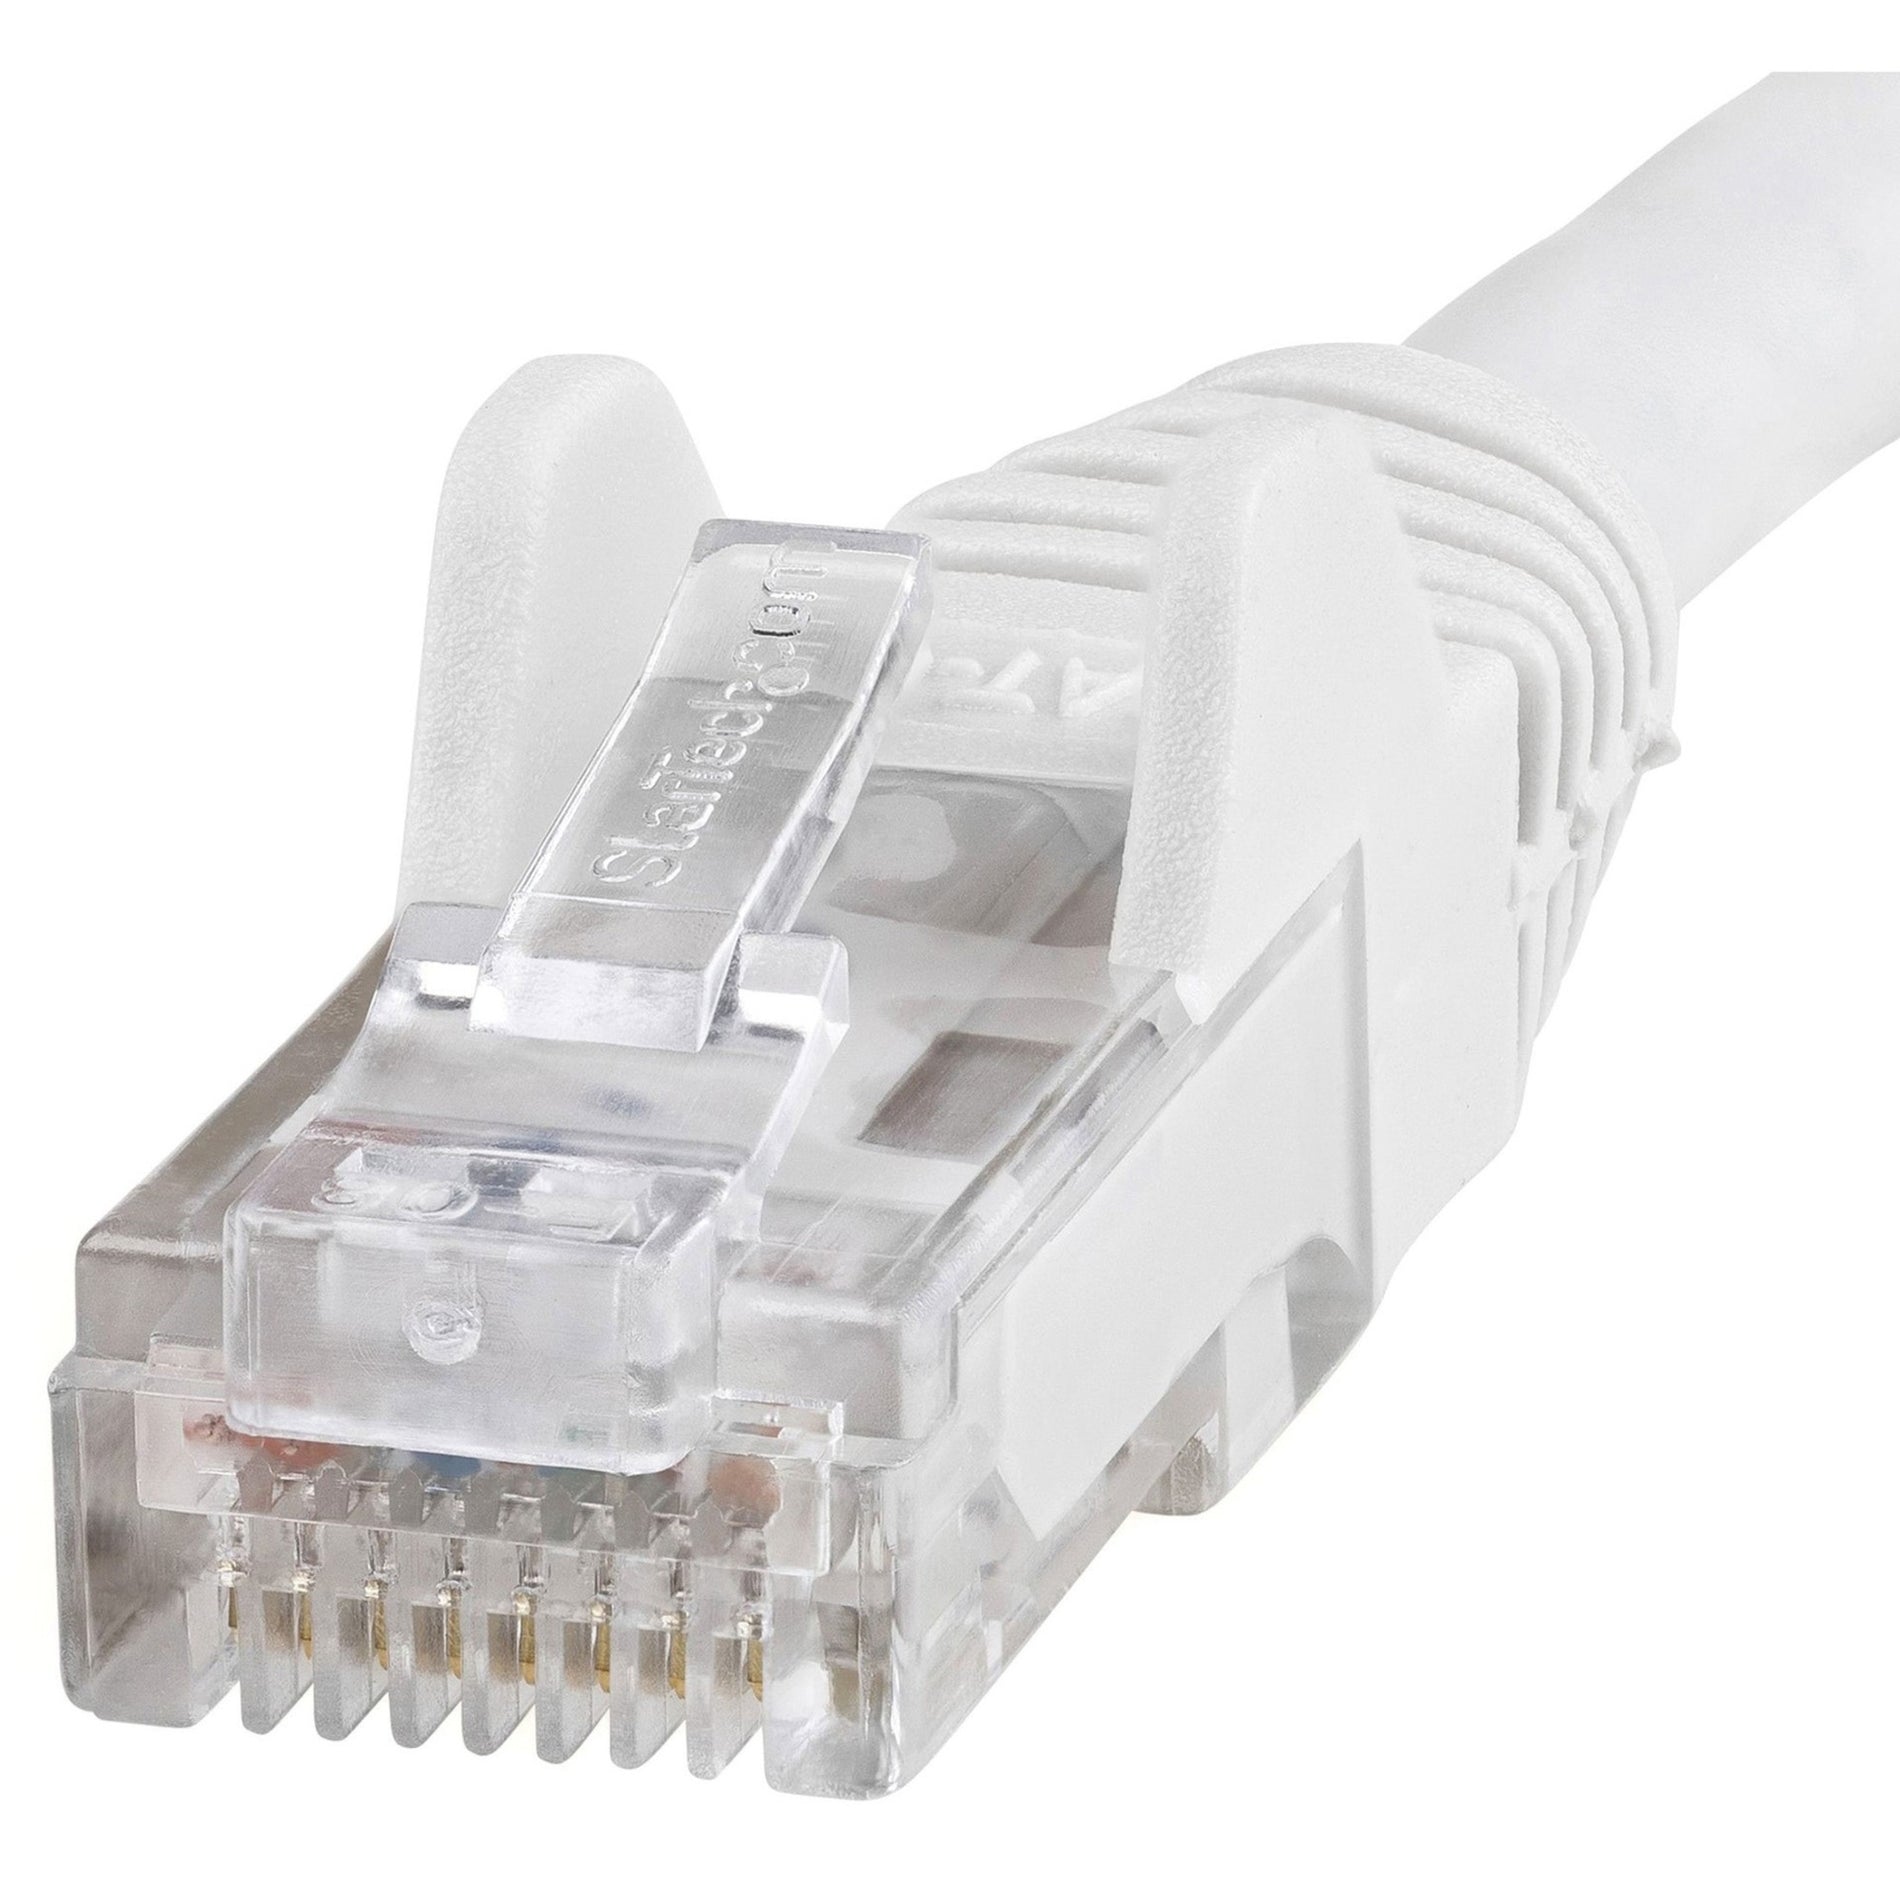 StarTech.com N6PATCH7WH 7 ft White Snagless Cat6 UTP Patch Cable Lifetime Warranty ETL Verified スタートレック・ドットコム N6PATCH7WH 7 フィート ホワイト スナッグレス Cat6 UTP パッチケーブル、終身保証、ETL 検証済み